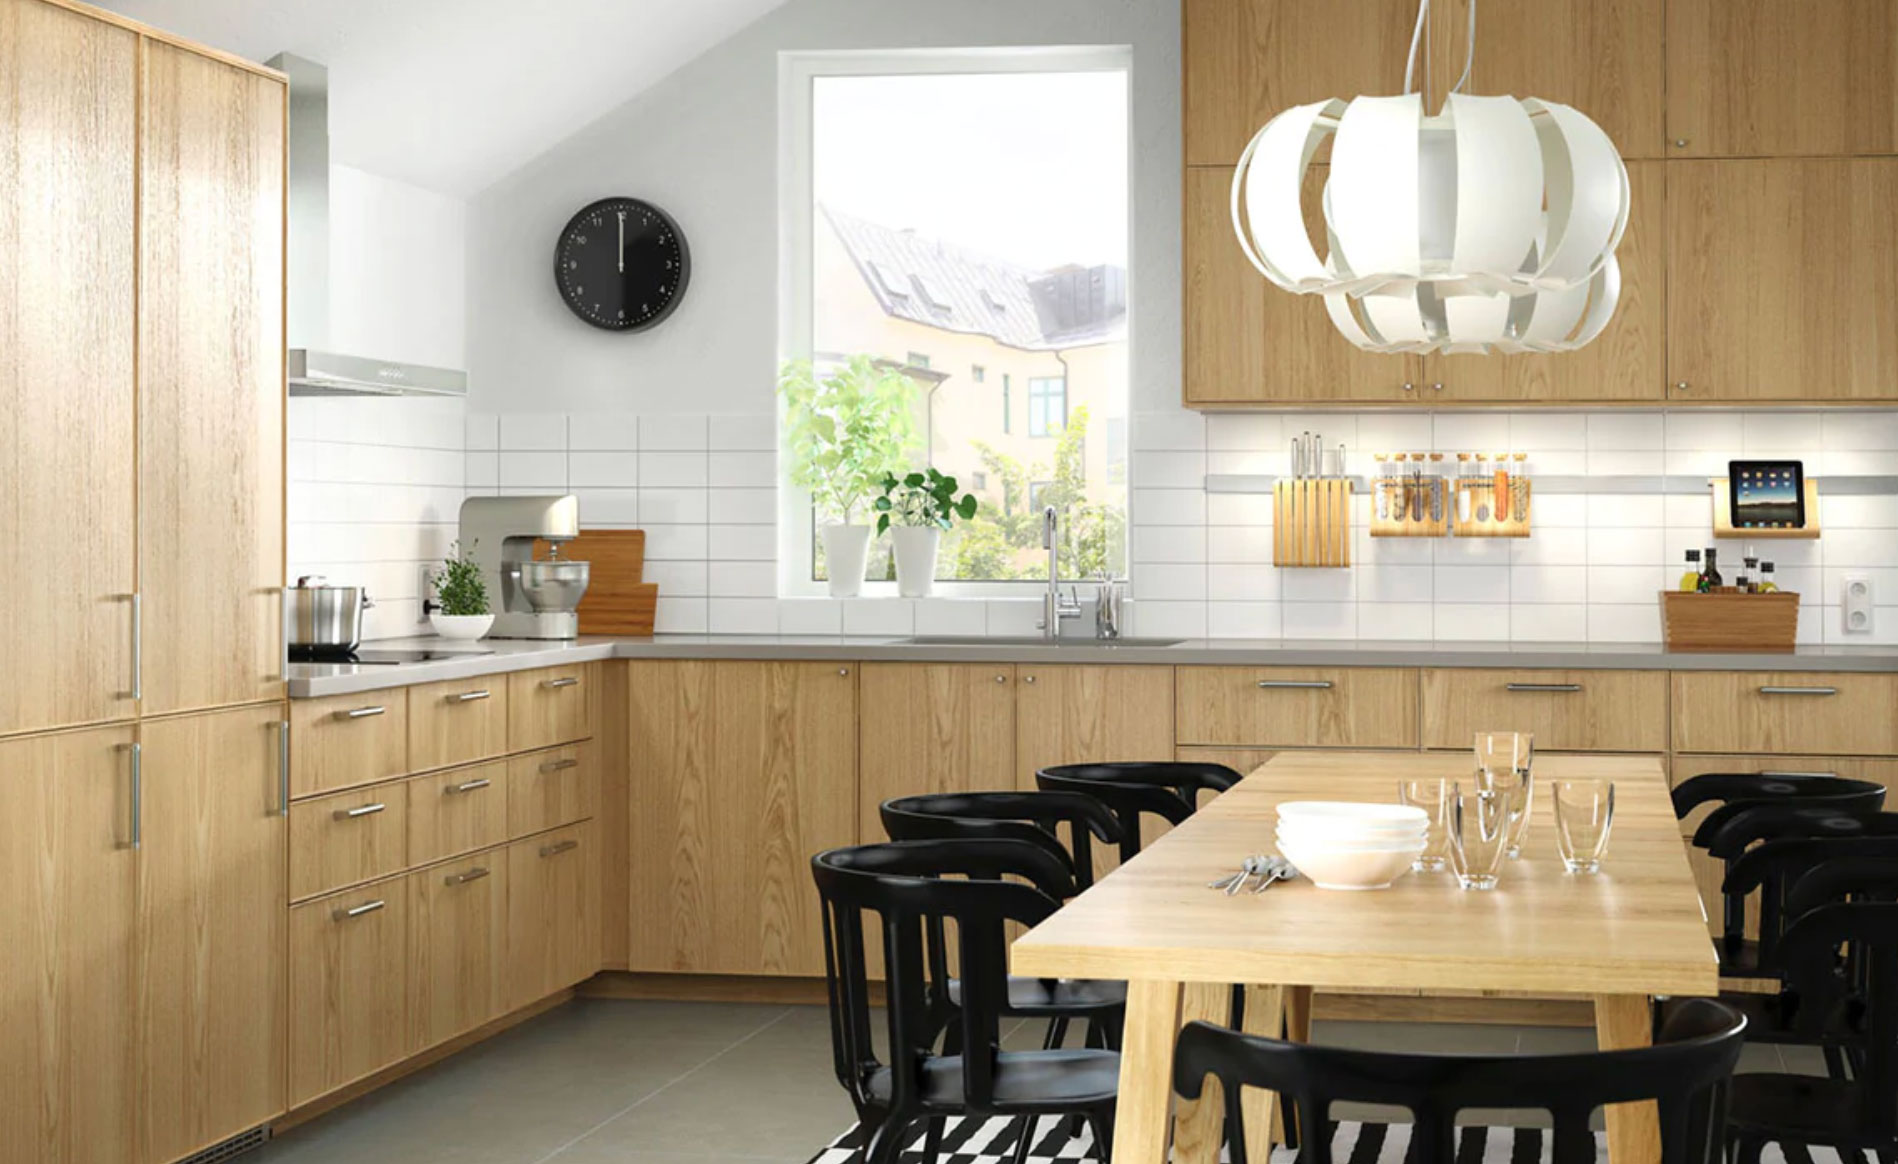 The Ikea Kitchen Sale Is On Get 30 Off Cabinet Fronts Today Real Homes